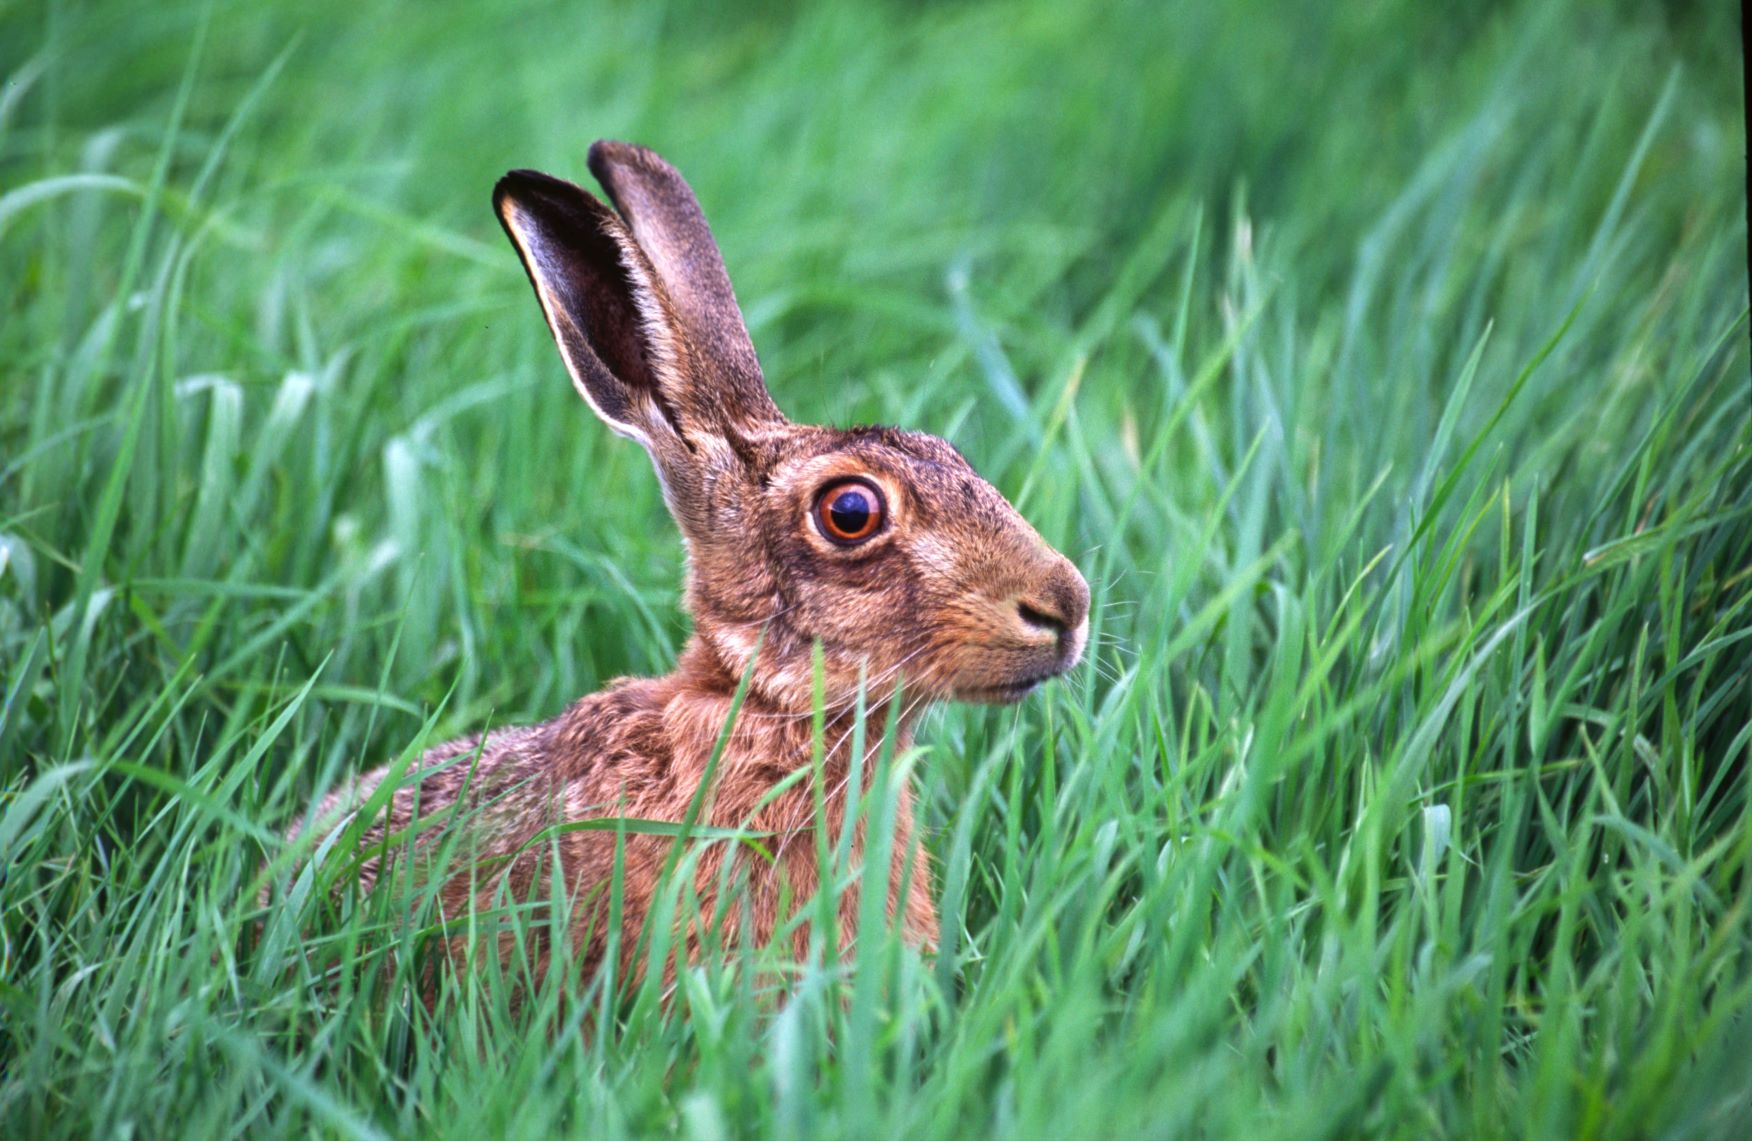 Close up shot of a brown hair resting in long grass.